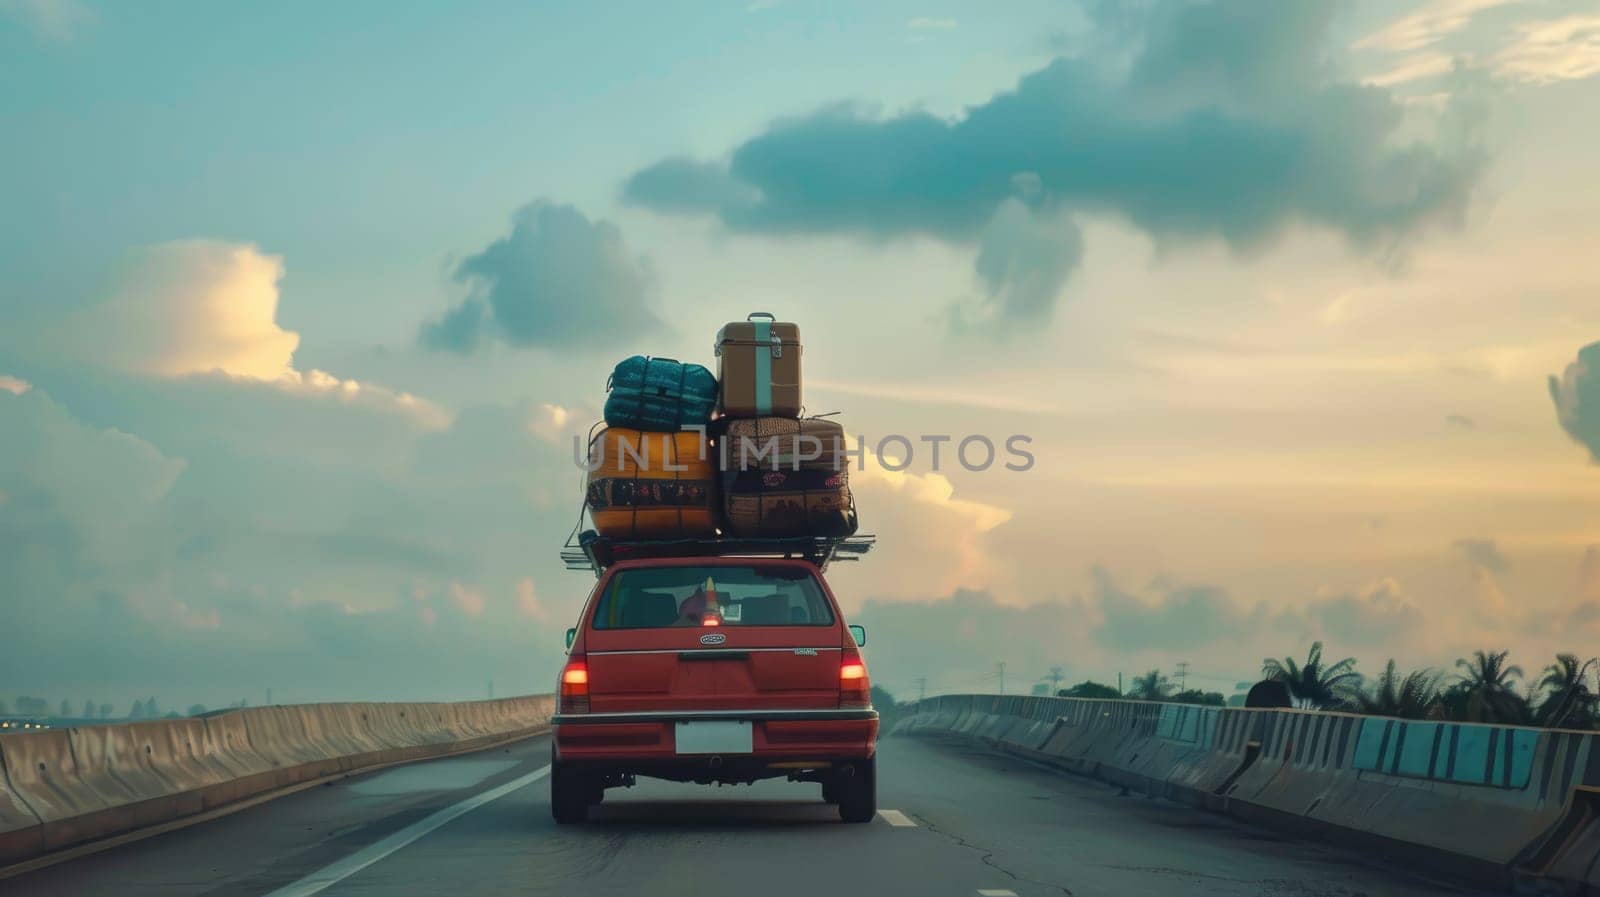 A car with luggage strapped on top with rural road landscape by nijieimu